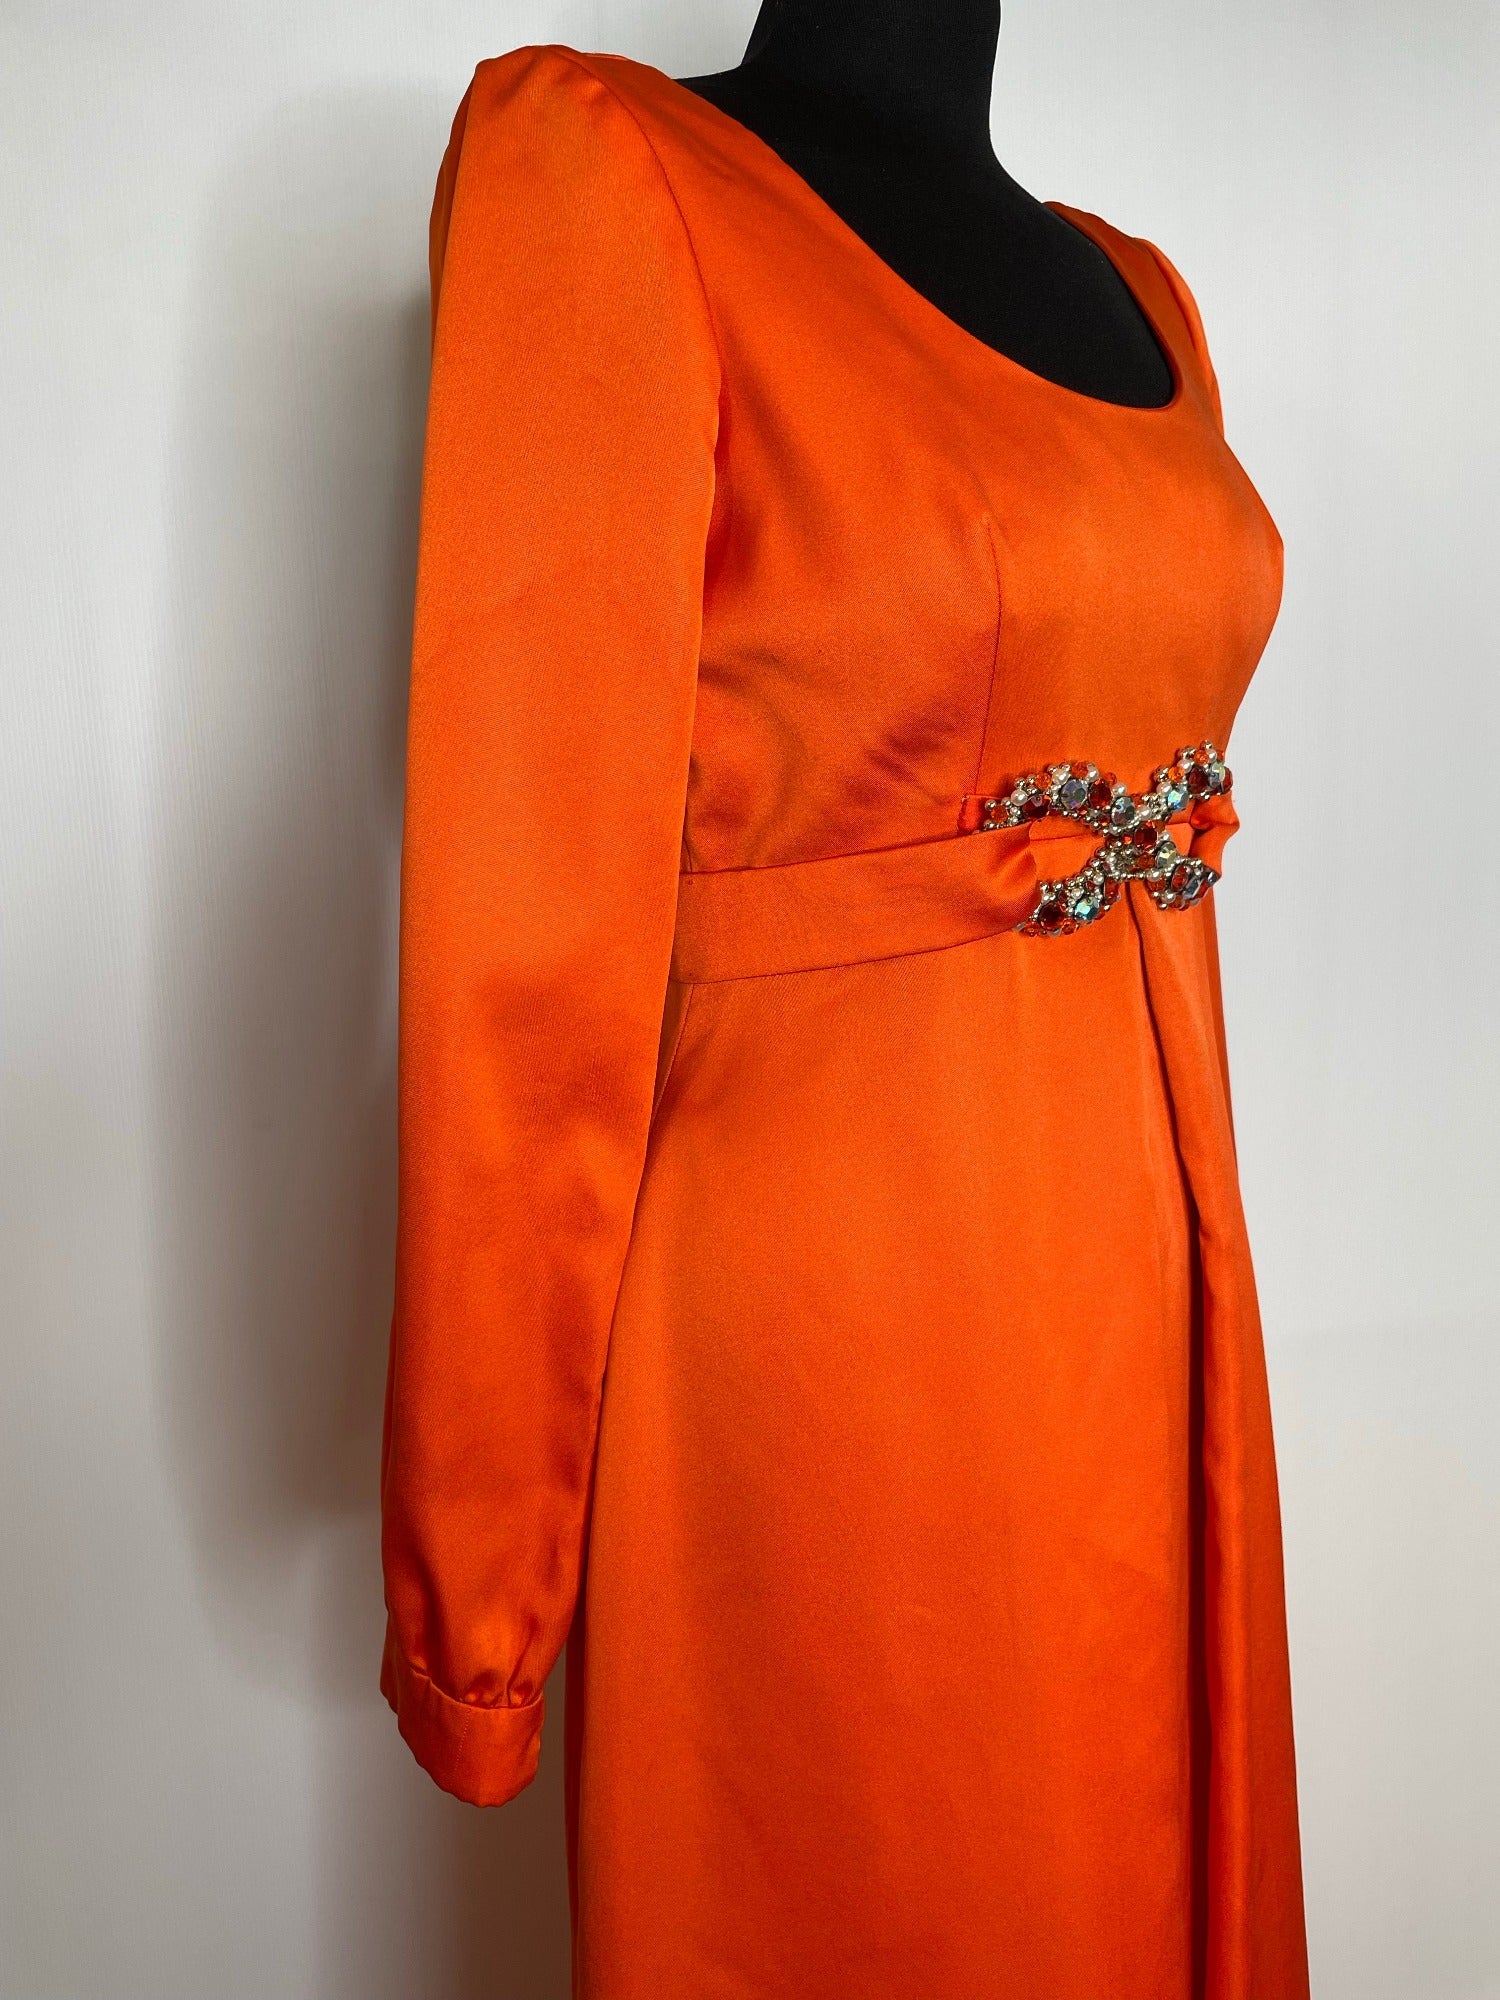 womens  vintage  Urban Village Vintage  scoop neck  scoop back  party  orange  new year  maxi dress  maxi  low back  long sleeved  long dress  jewelled  glamorous  glam  evening  dress  70s  60s  1970s  1960s  10